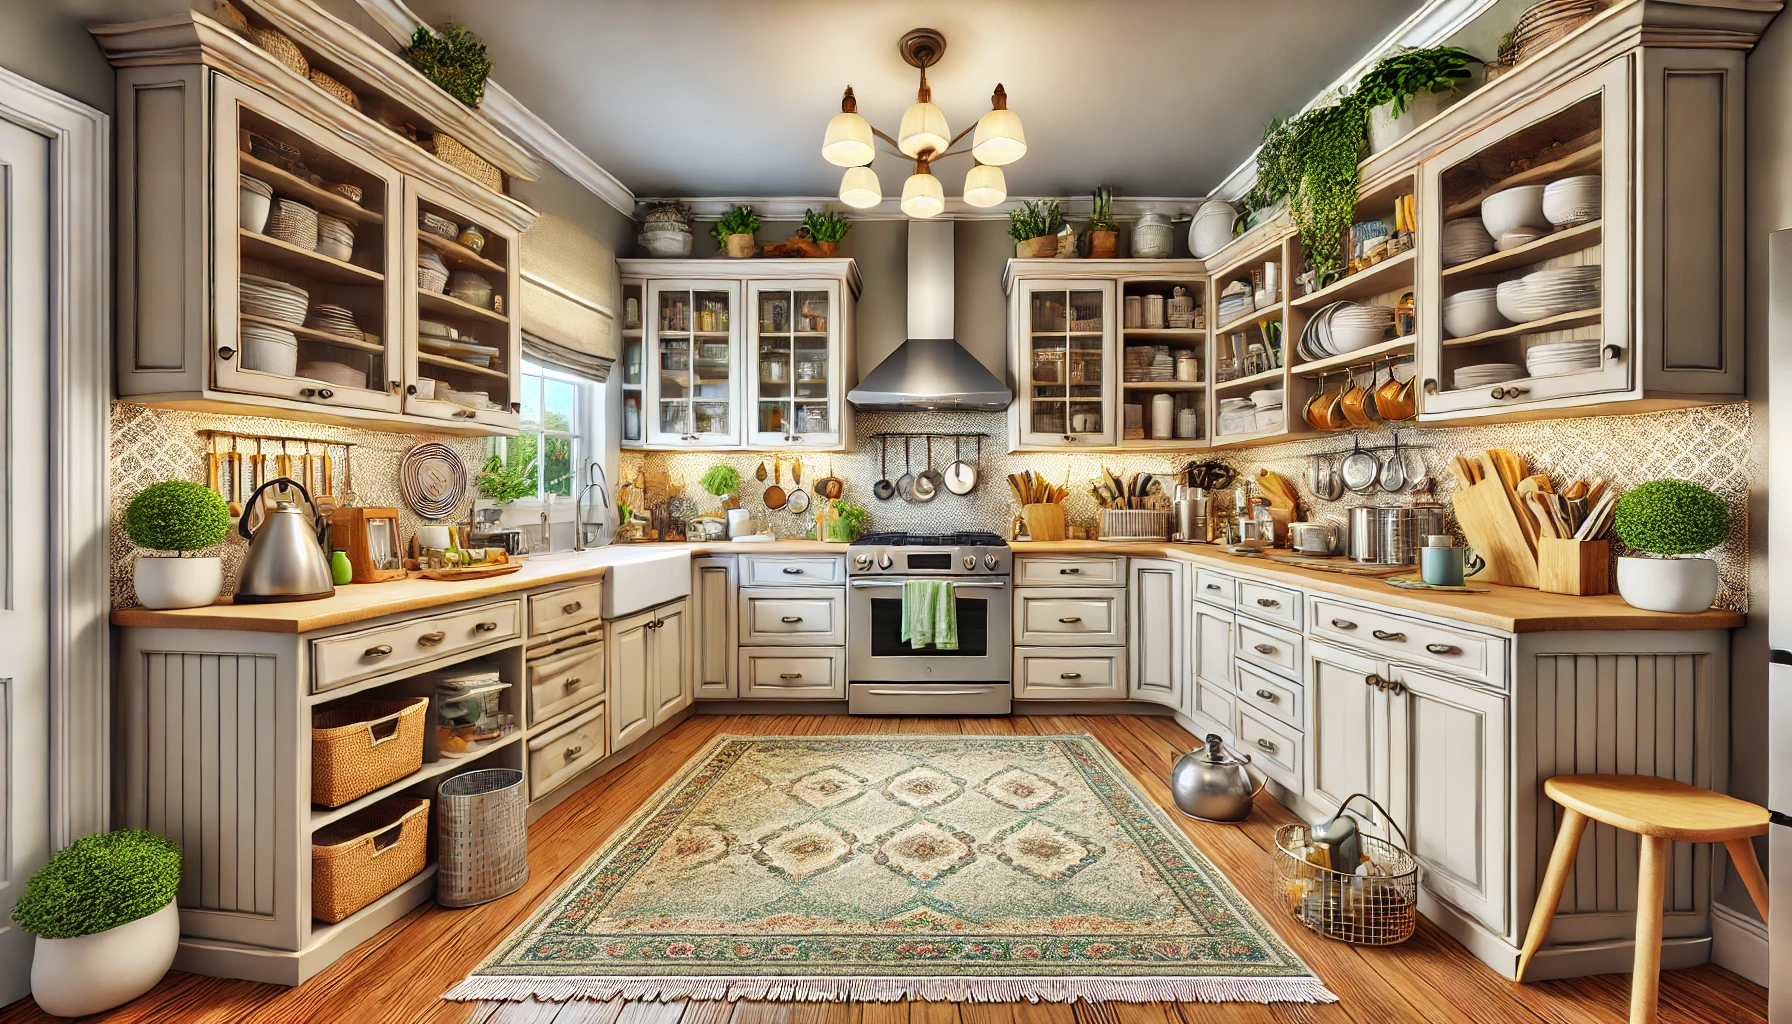 Cozy farmhouse kitchen with rustic decor and appliances.